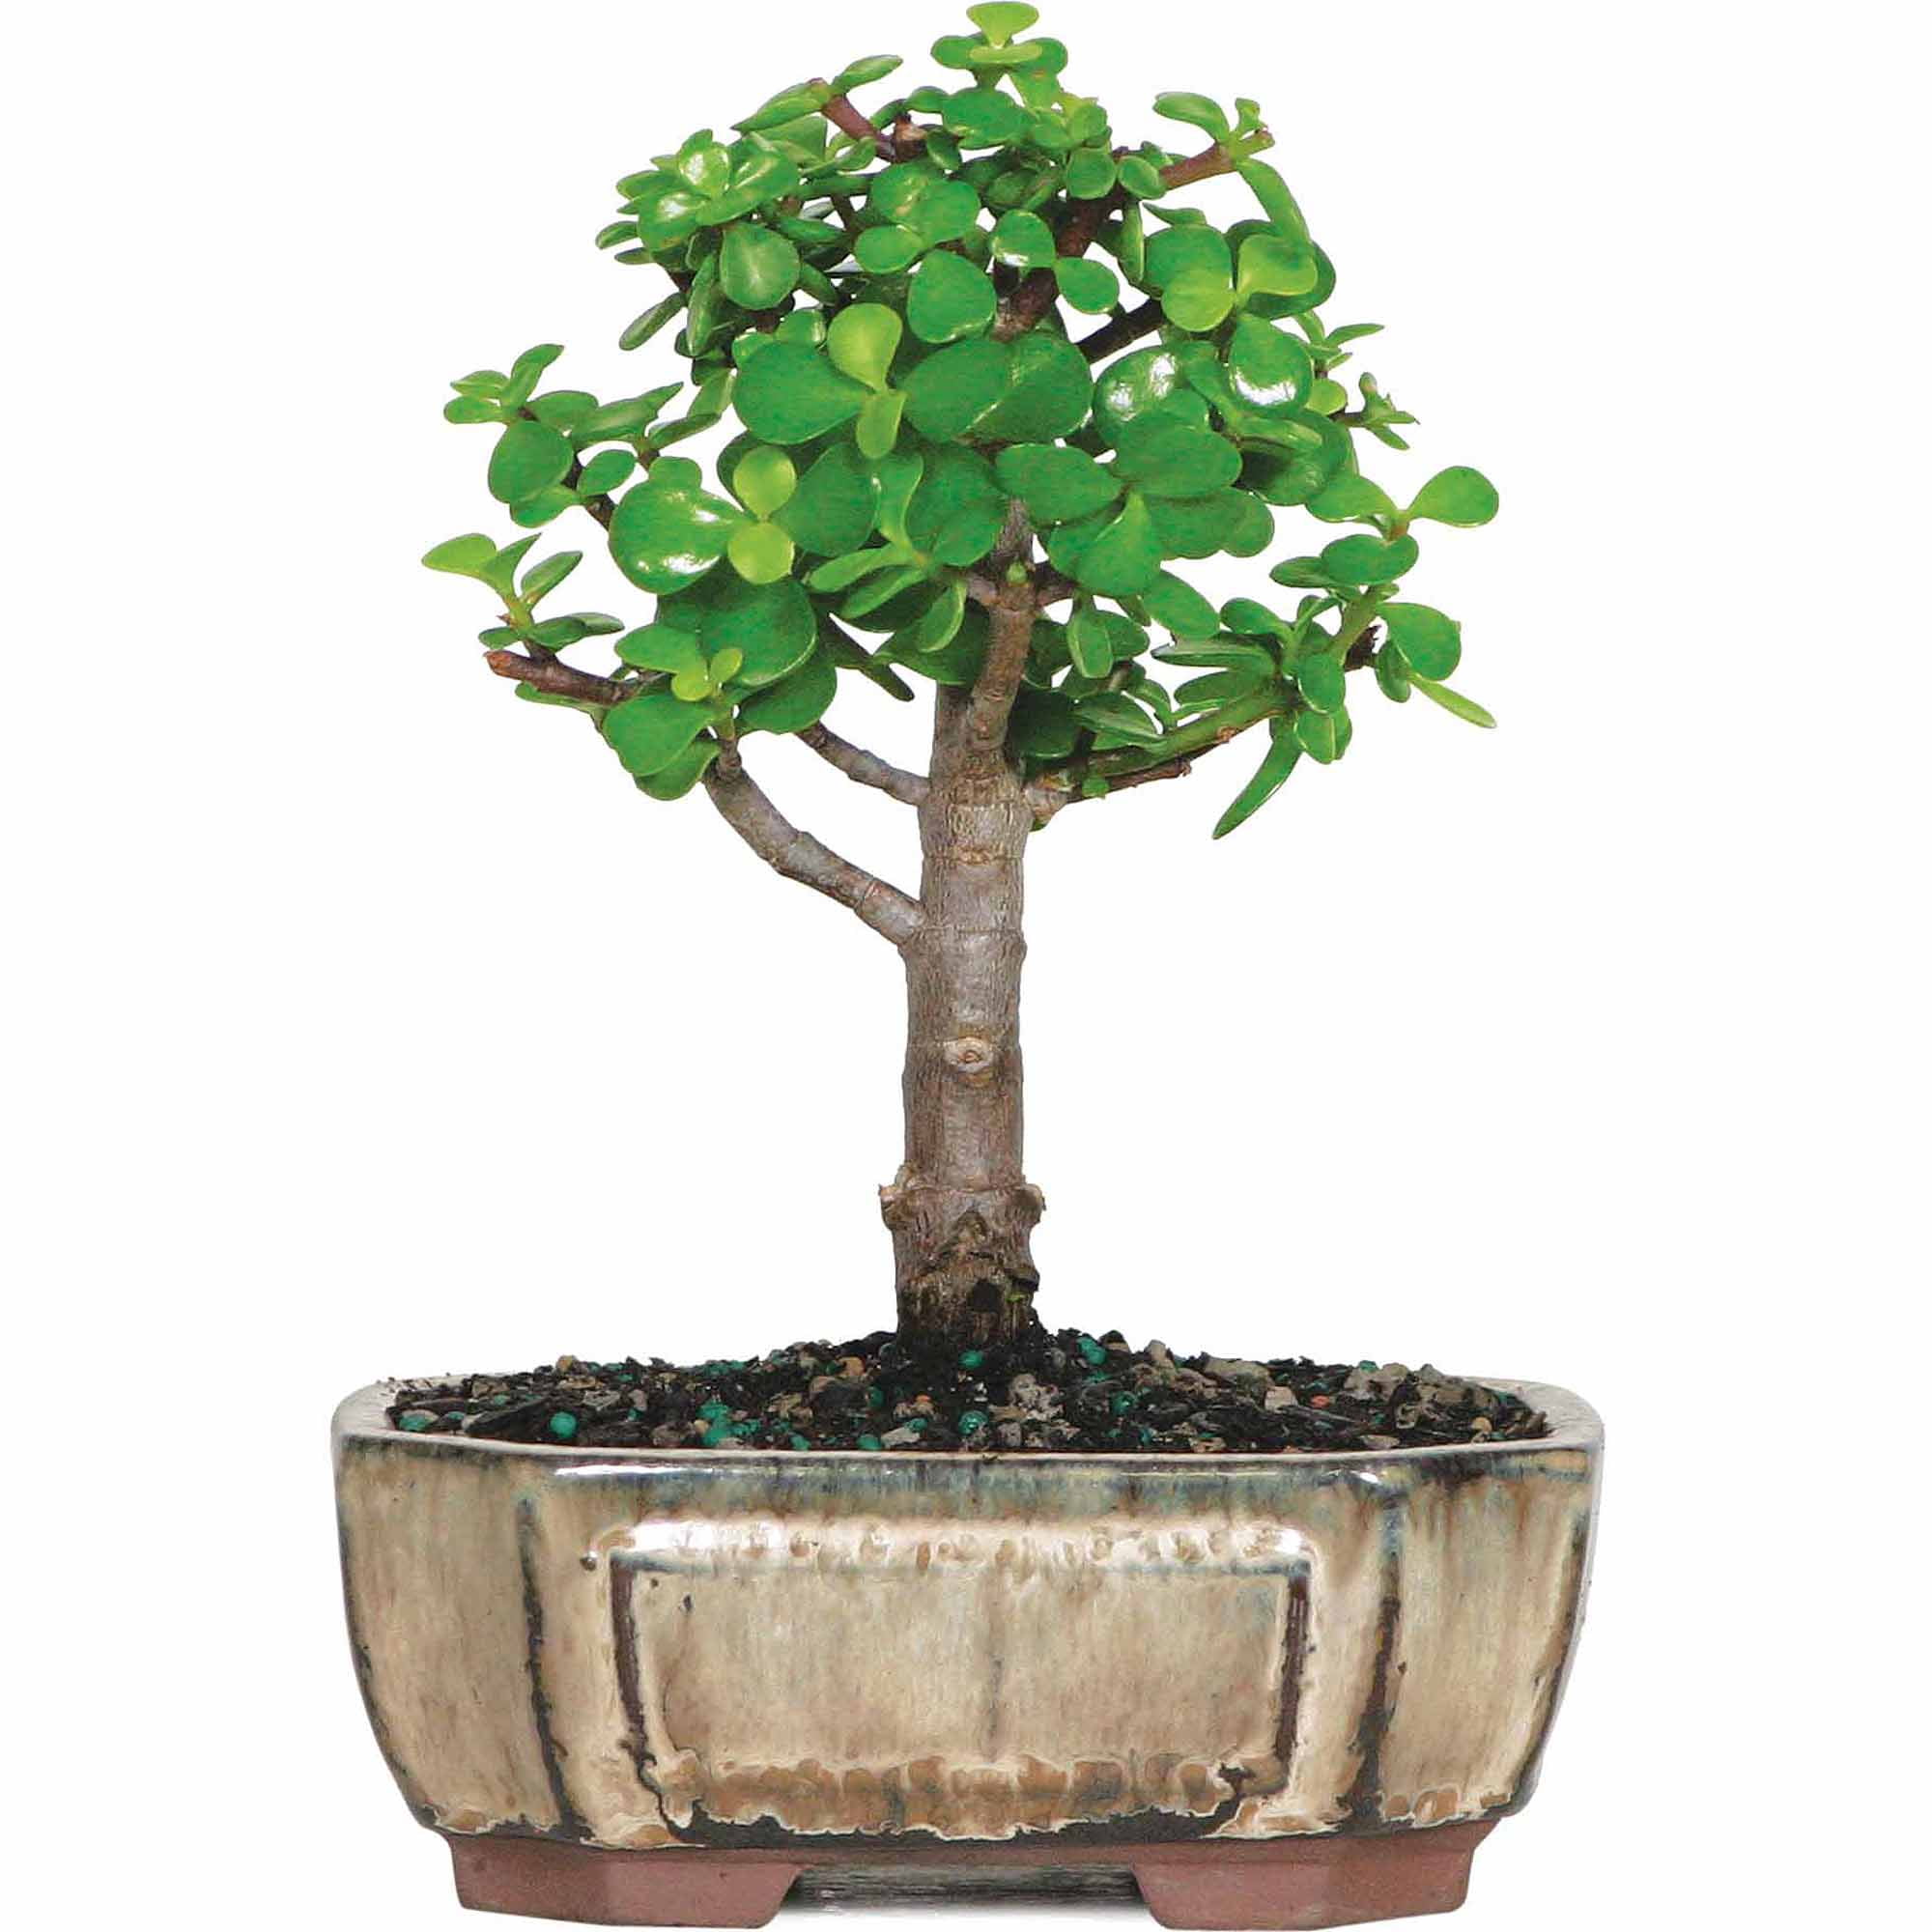 Humidity Tray & Deco Rock Brussels Live Dwarf Jade Indoor Bonsai Tree 5 Years Old; 8 to 12 Tall with Decorative Container 